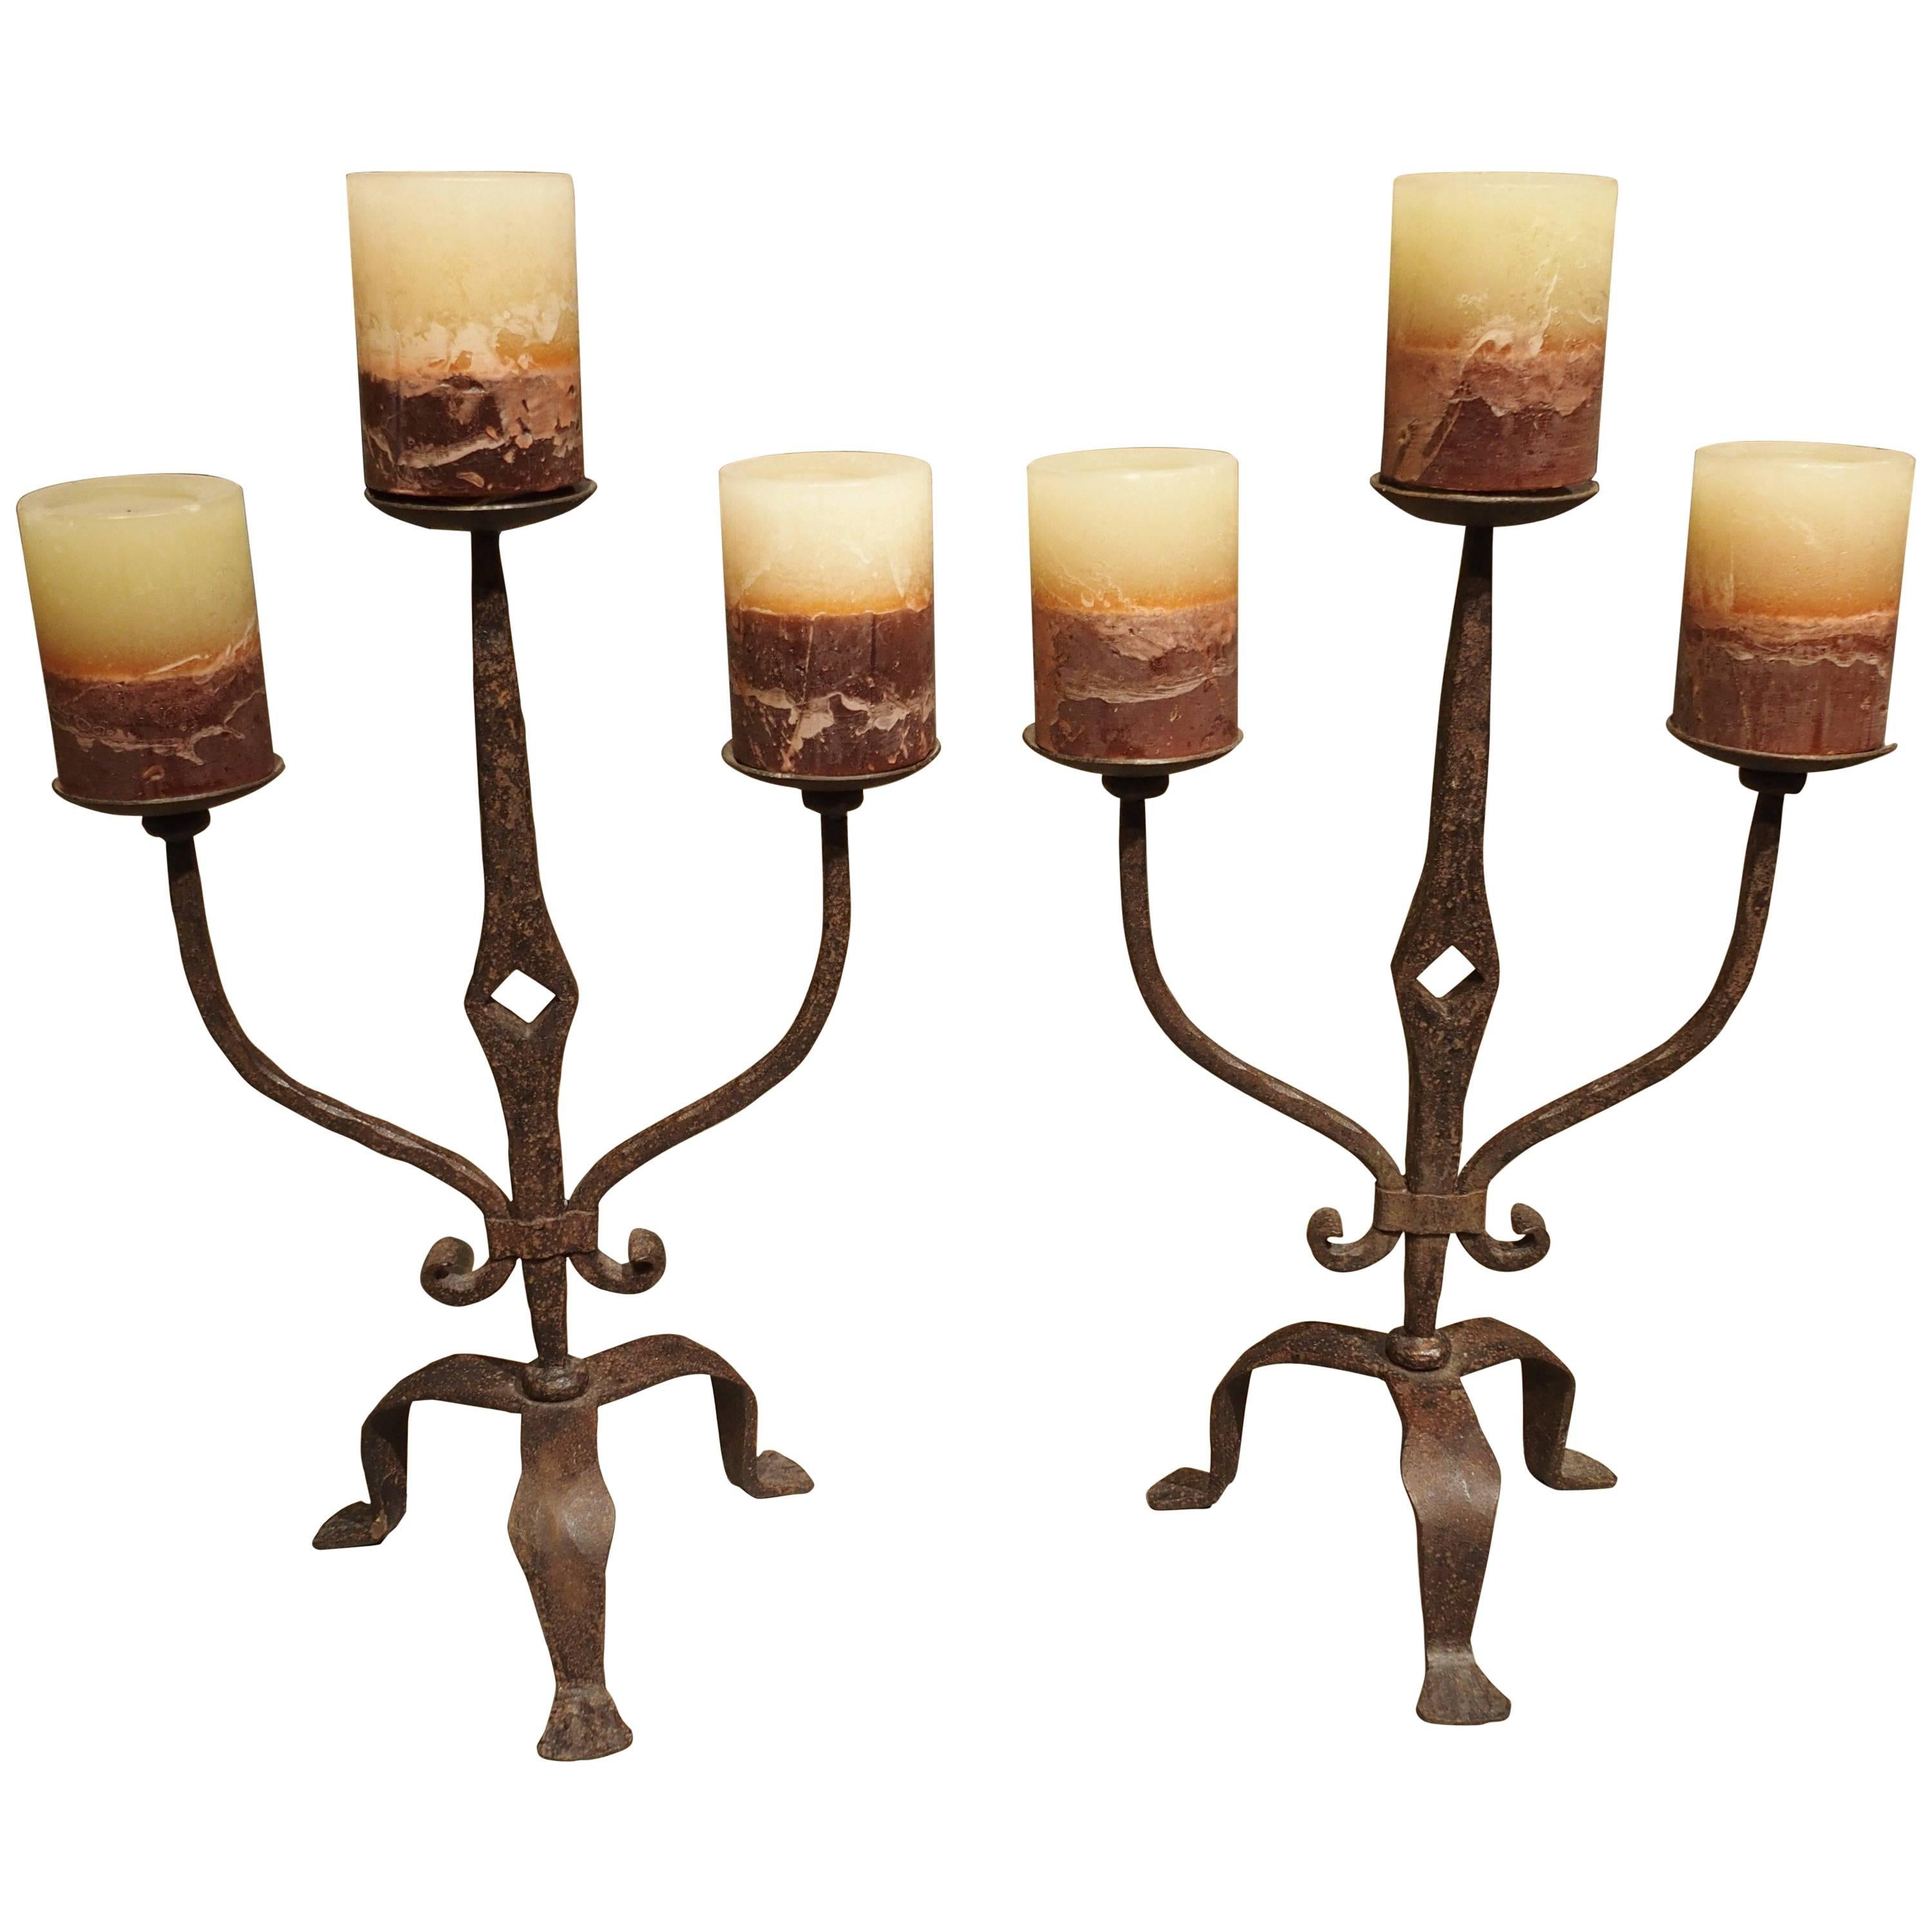 Pair of Forged Iron Candelabras from France